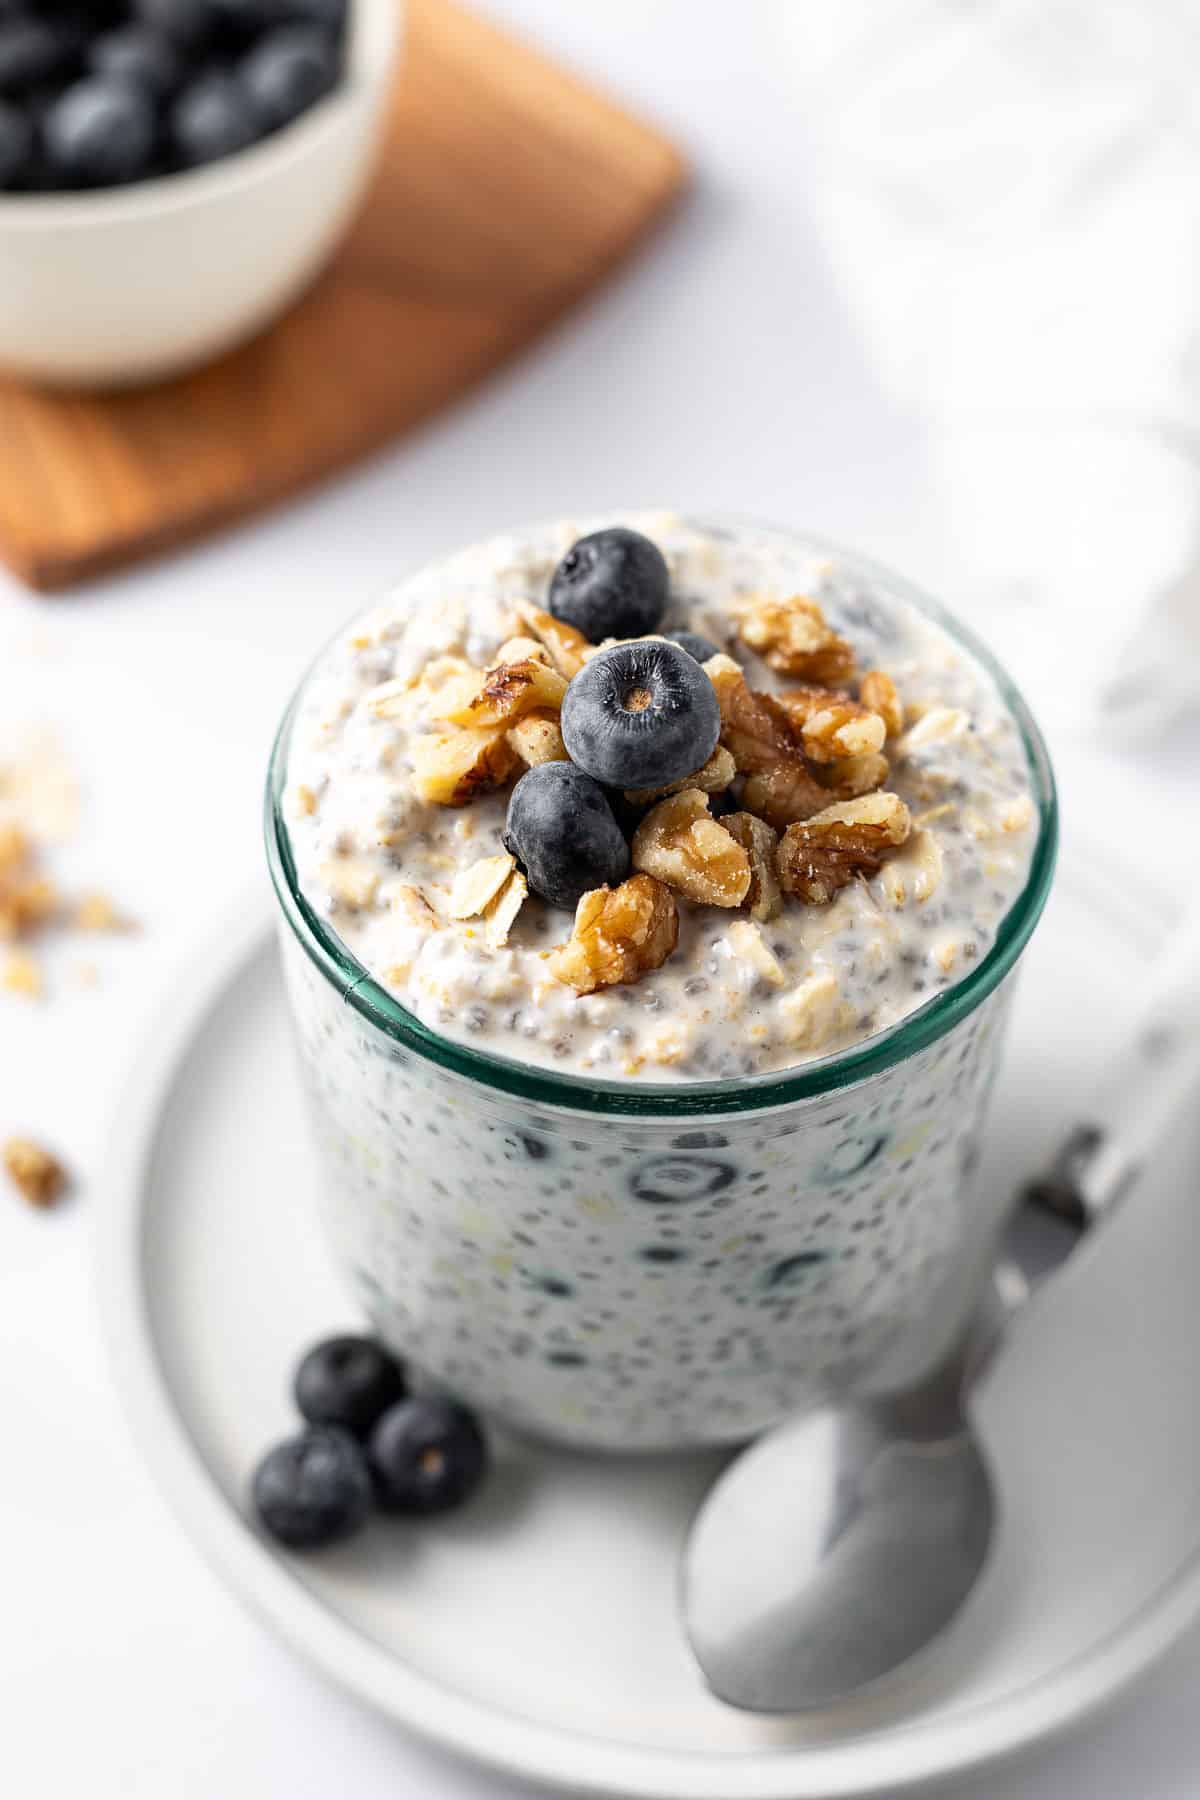 Blueberry Overnight Oats oats in a glass jar on a white plate with a spoon.